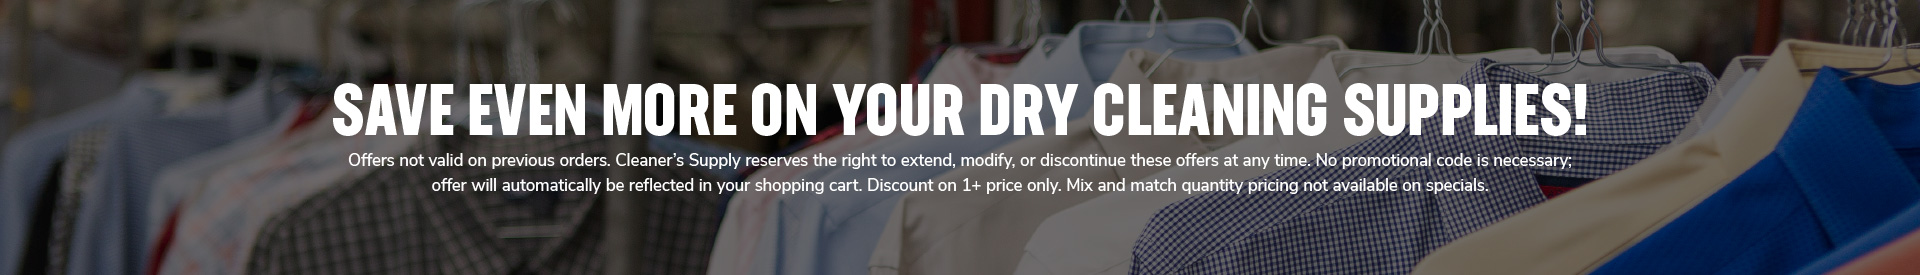 SAVE even more ON YOUR DRY CLEANING SUPPLIES! Offers not valid on previous orders. Cleaner’s Supply reserves the right to extend, modify, or discontinue these offers at any time. No promotional code is necessary;  offer will automatically be reflected in your shopping cart. Discount on 1+ price only. Mix and match quantity pricing not available on specials.